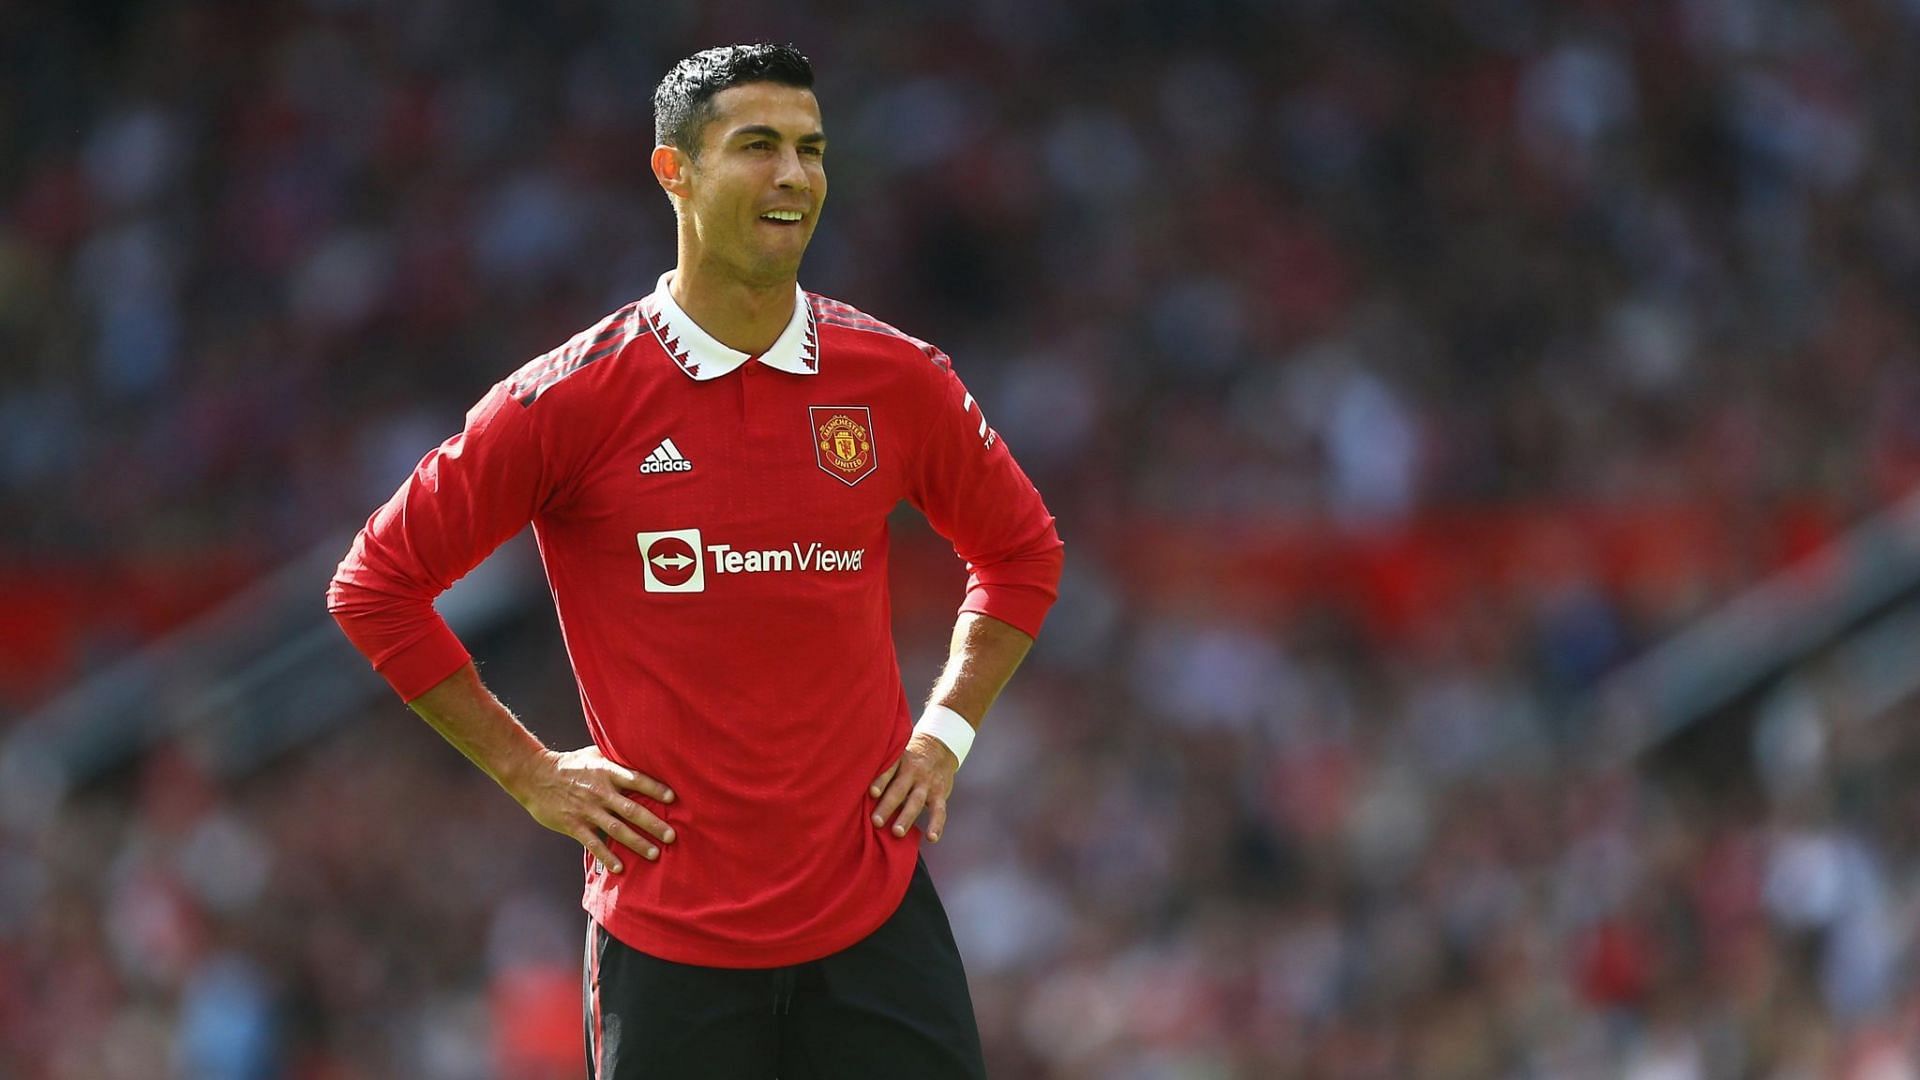 Manchester United earned a brilliant win against Liverpool with Cristiano Ronaldo left out of the starting XI